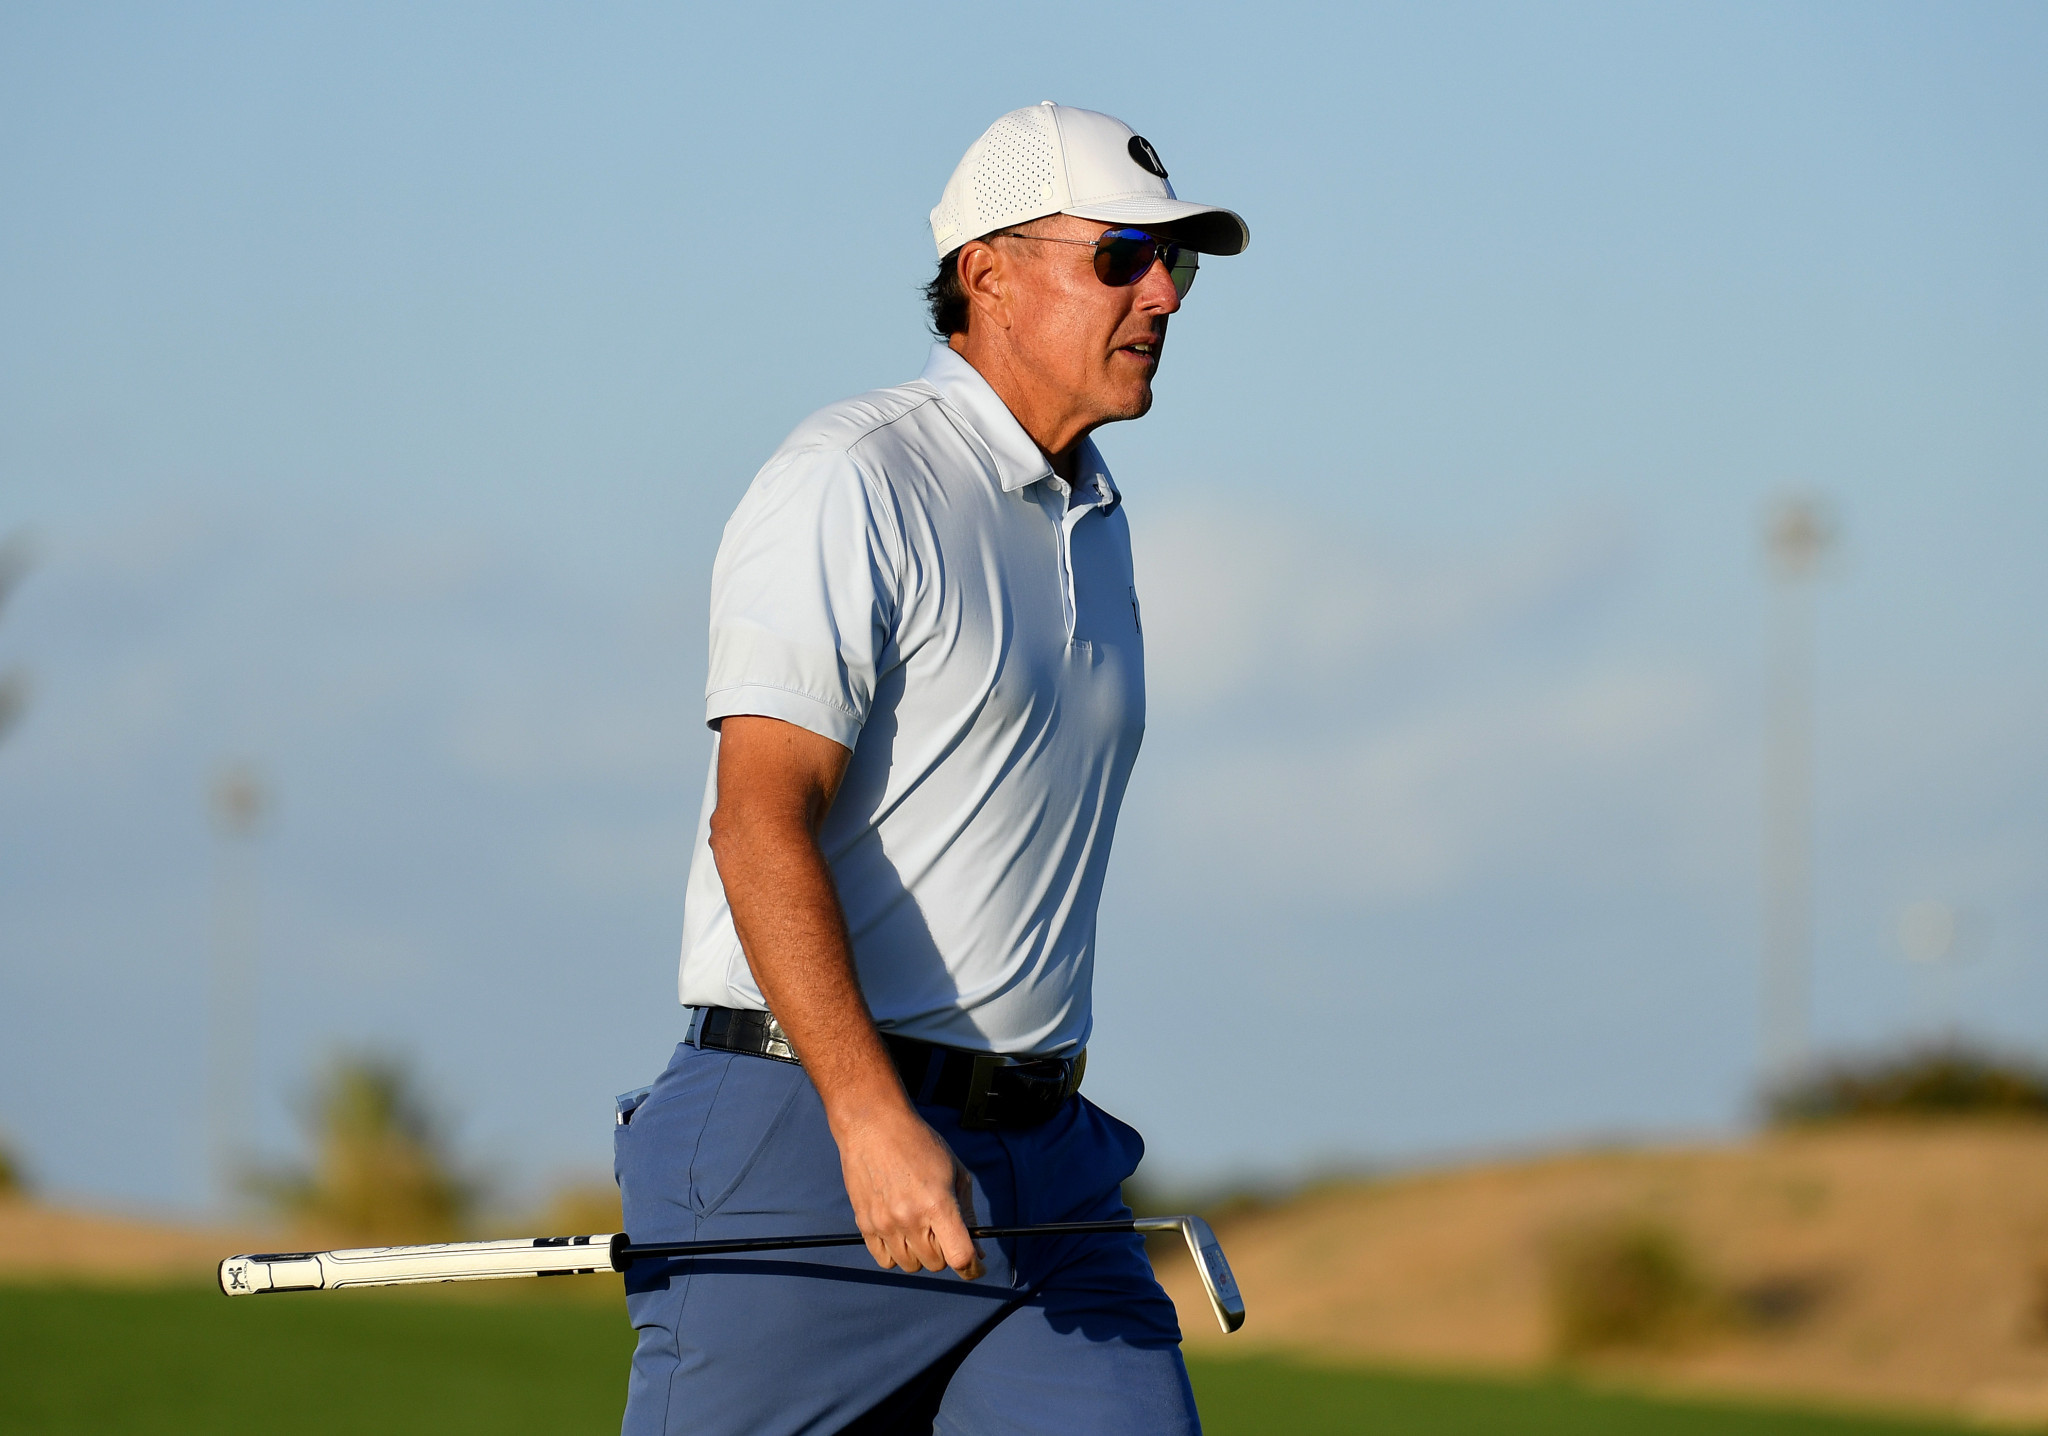 A group of eight LIV Golf rebels including Phil Mickelson of the US have removed themselves as plaintiffs in the antitrust lawsuit against the PGA Tour ©Getty Images